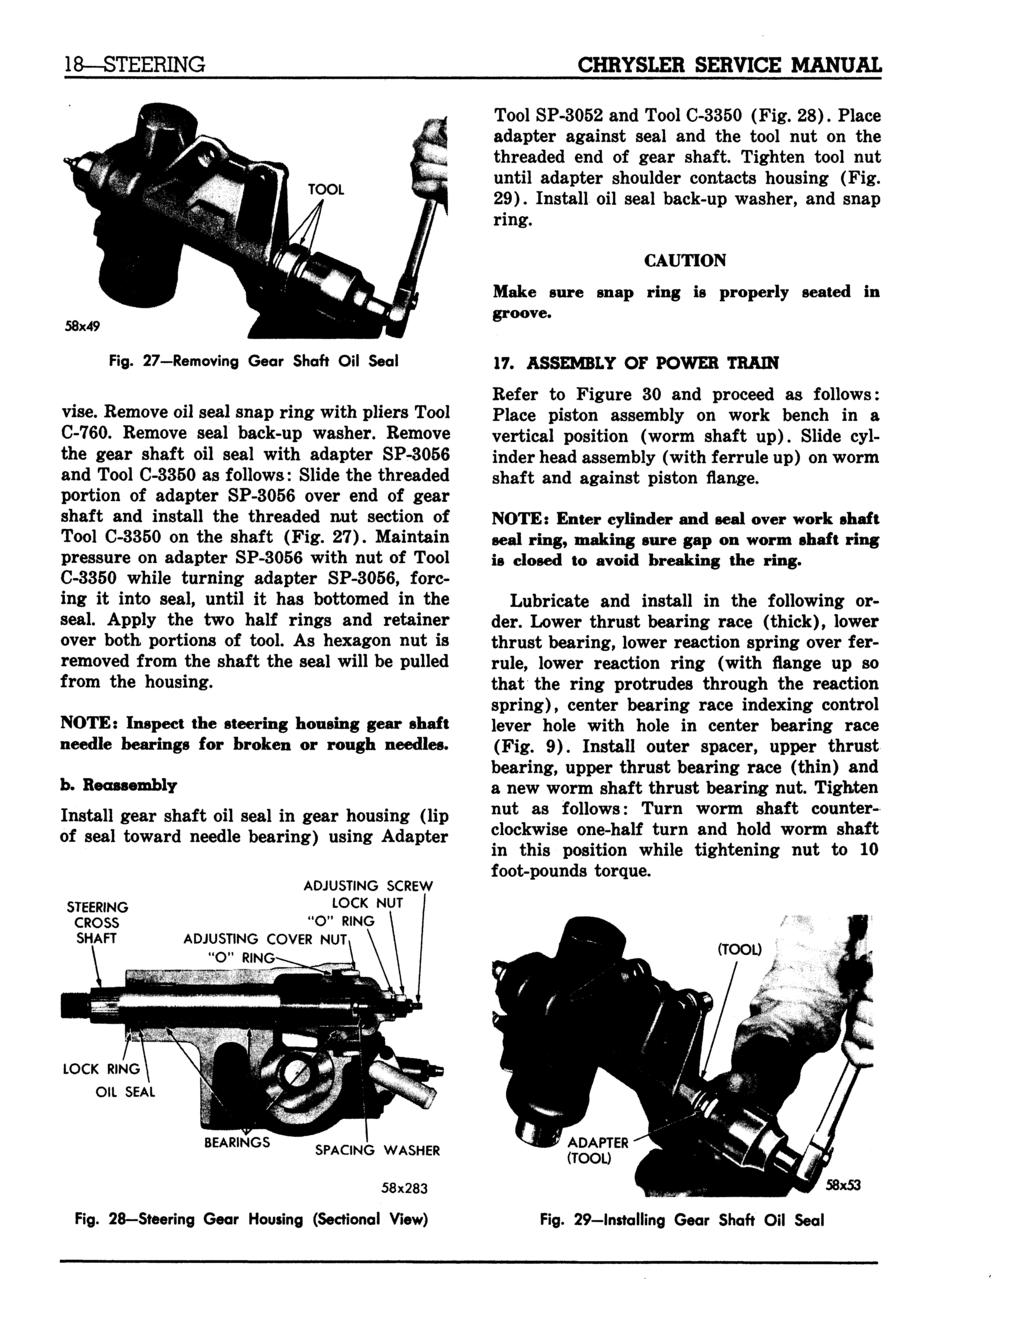 IS STEERING CHRYSLER SERVICE MANUAL Tool SP-3052 and Tool C-3350 (Fig. 28). Place adapter against seal and the tool nut on the threaded end of gear shaft.